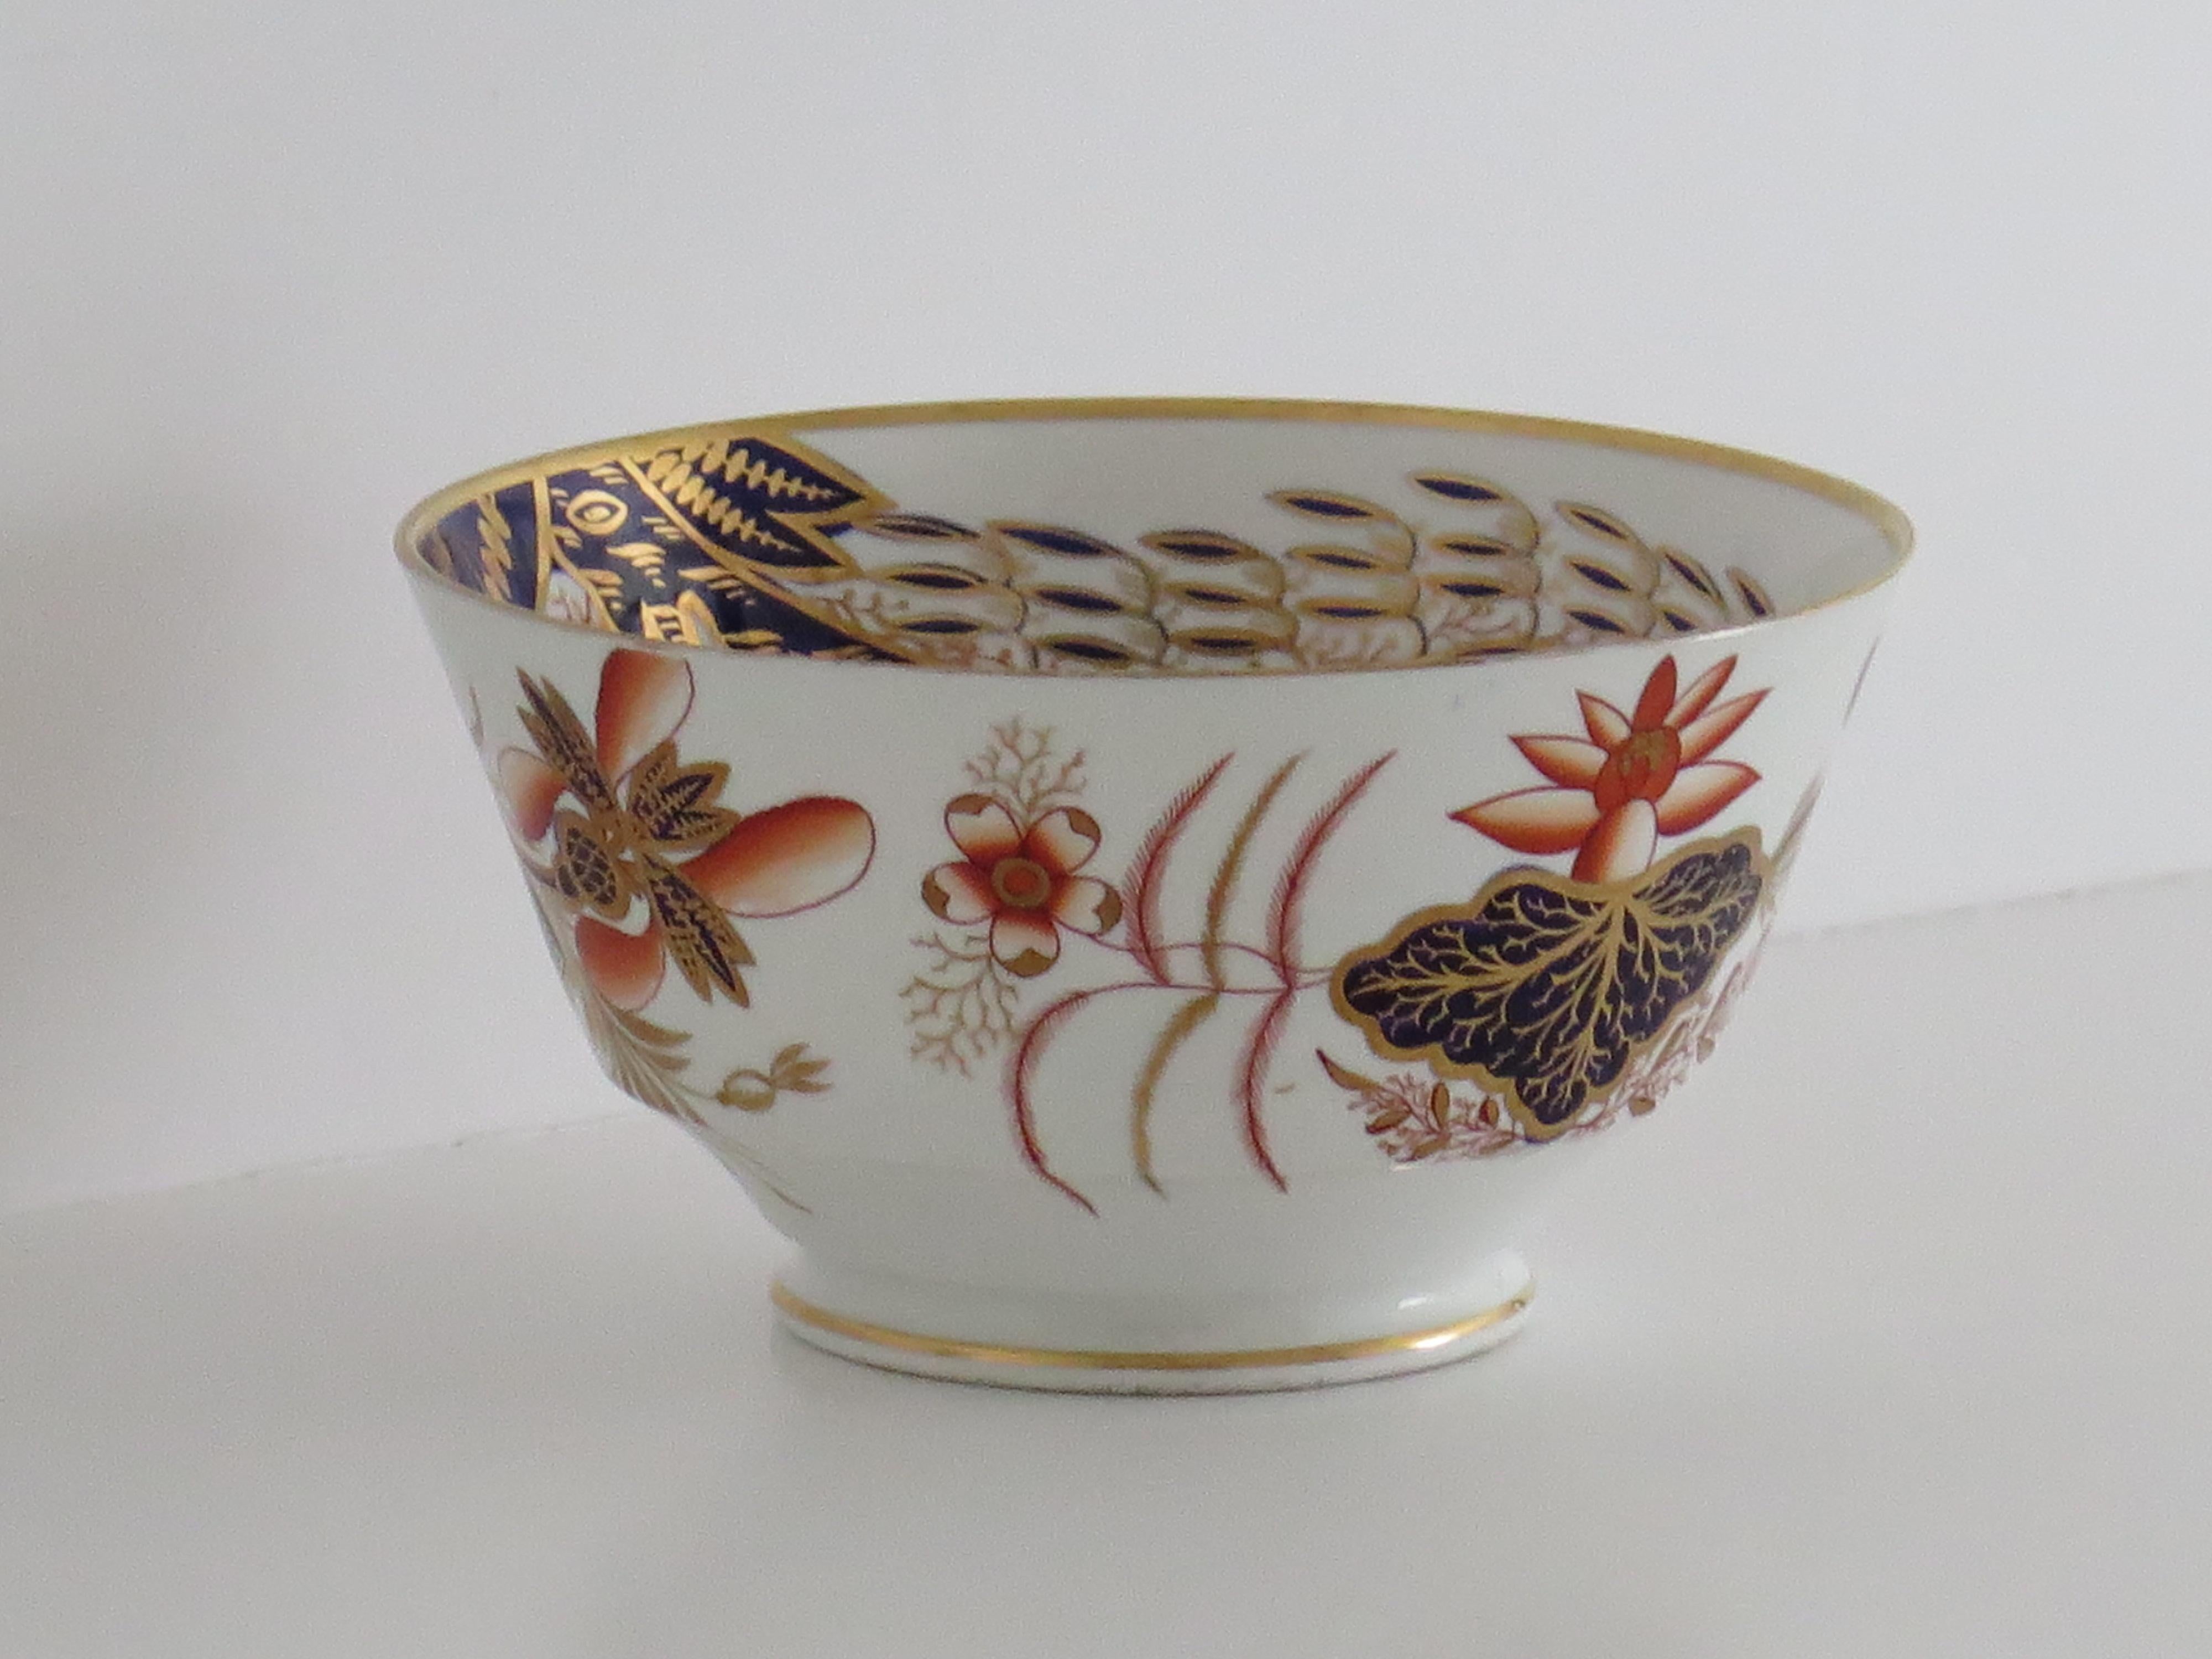 English Early 19th Century Spode Porcelain Slop Bowl in gilded Pattern 2214, Ca 1810 For Sale